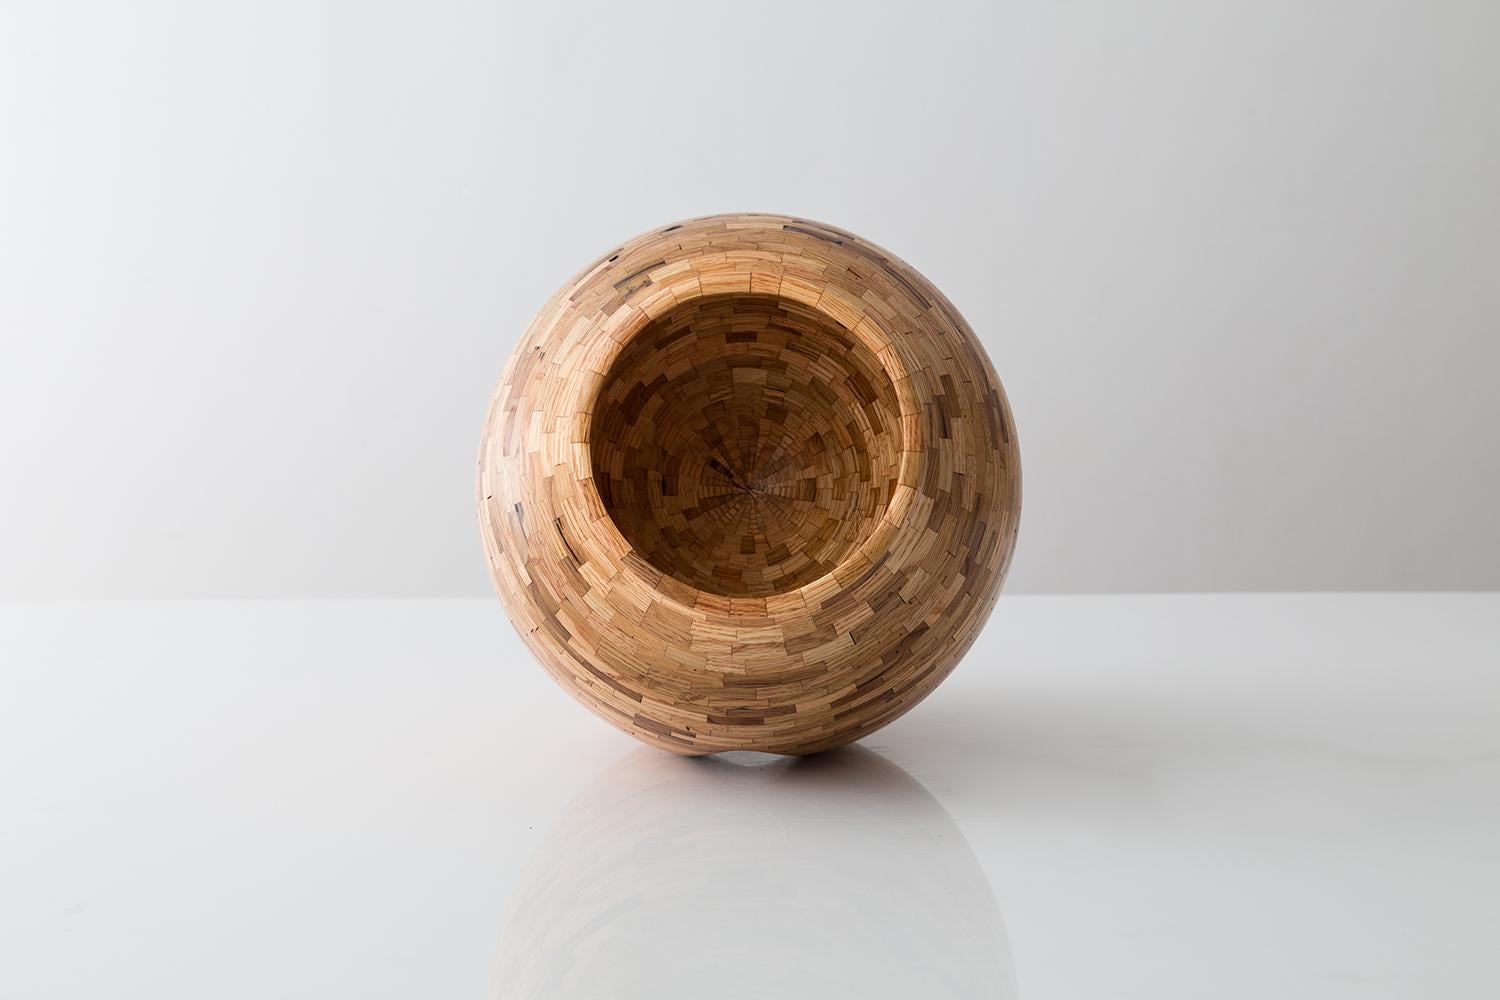 Contemporary American salvaged oak stacked wood vessel with honed finish. Titled 'Rocker' by Richard Haining.


Richard Haining is a Brooklyn-based studio furniture maker and artist. Raised in Atlanta GA and educated at the Rhode Island School of